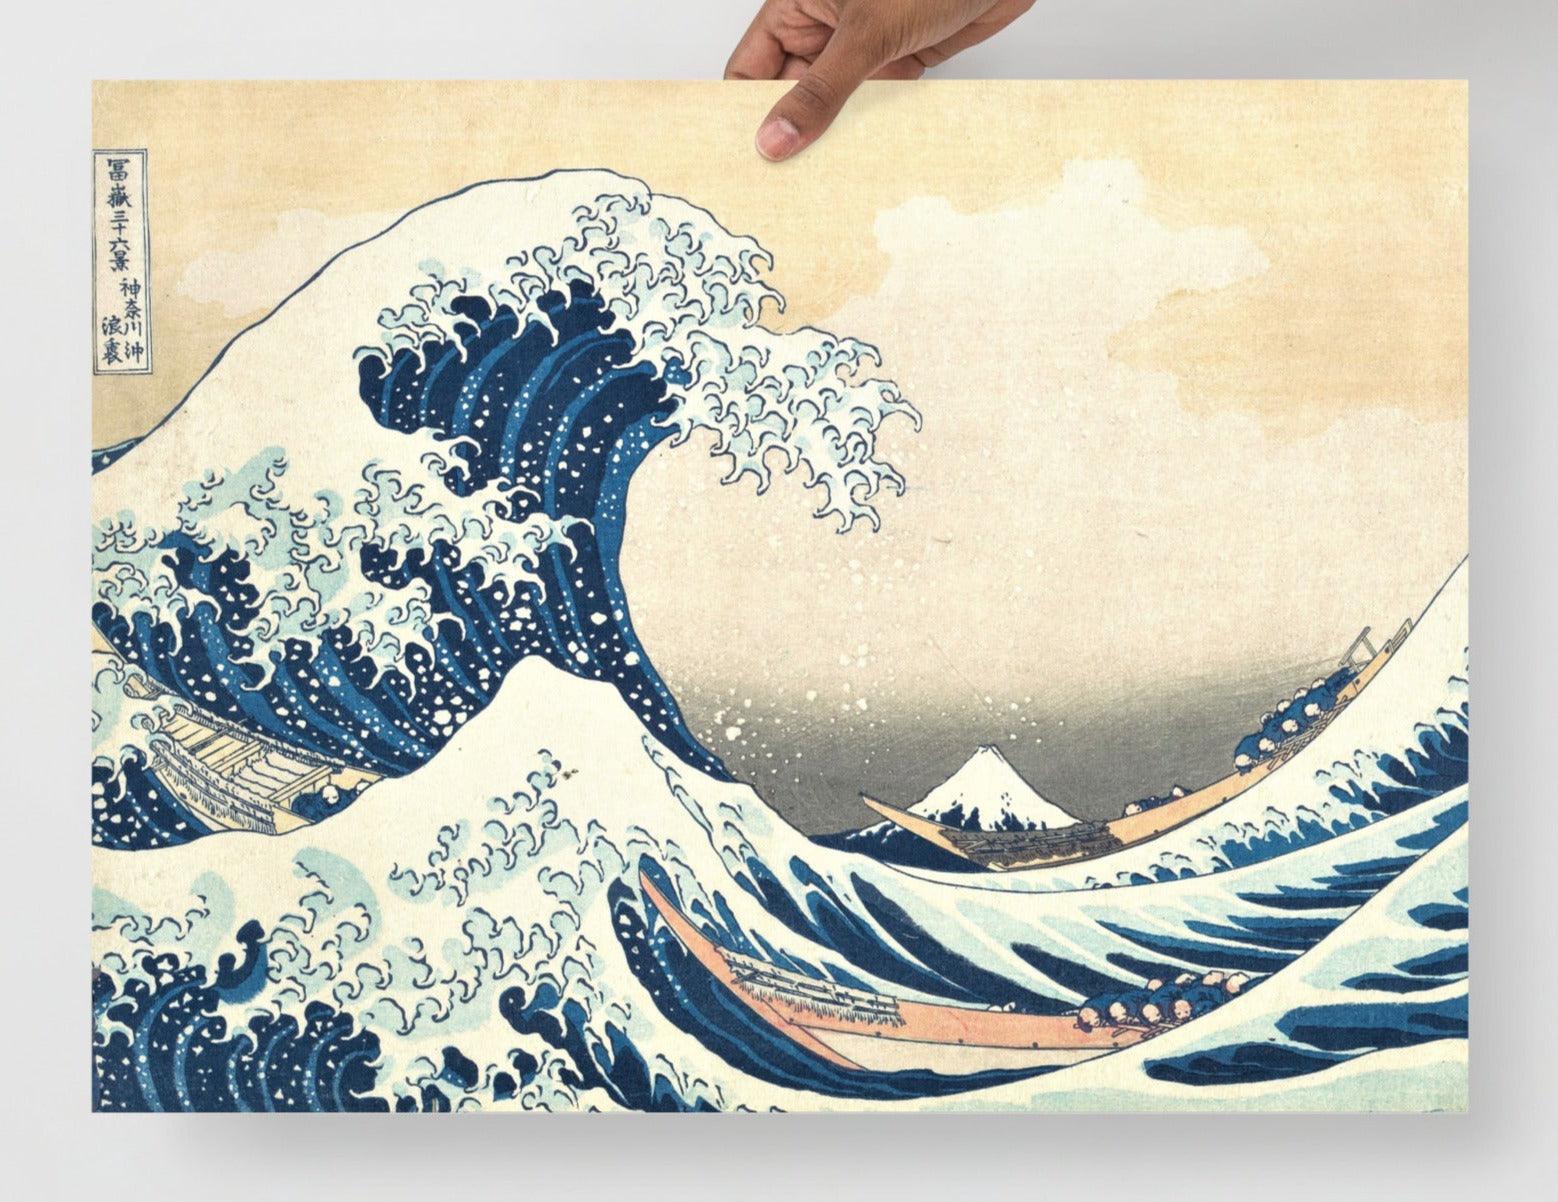 The Great Wave off Kanagawa by Hokusai poster on a plain backdrop in size 18x24”.